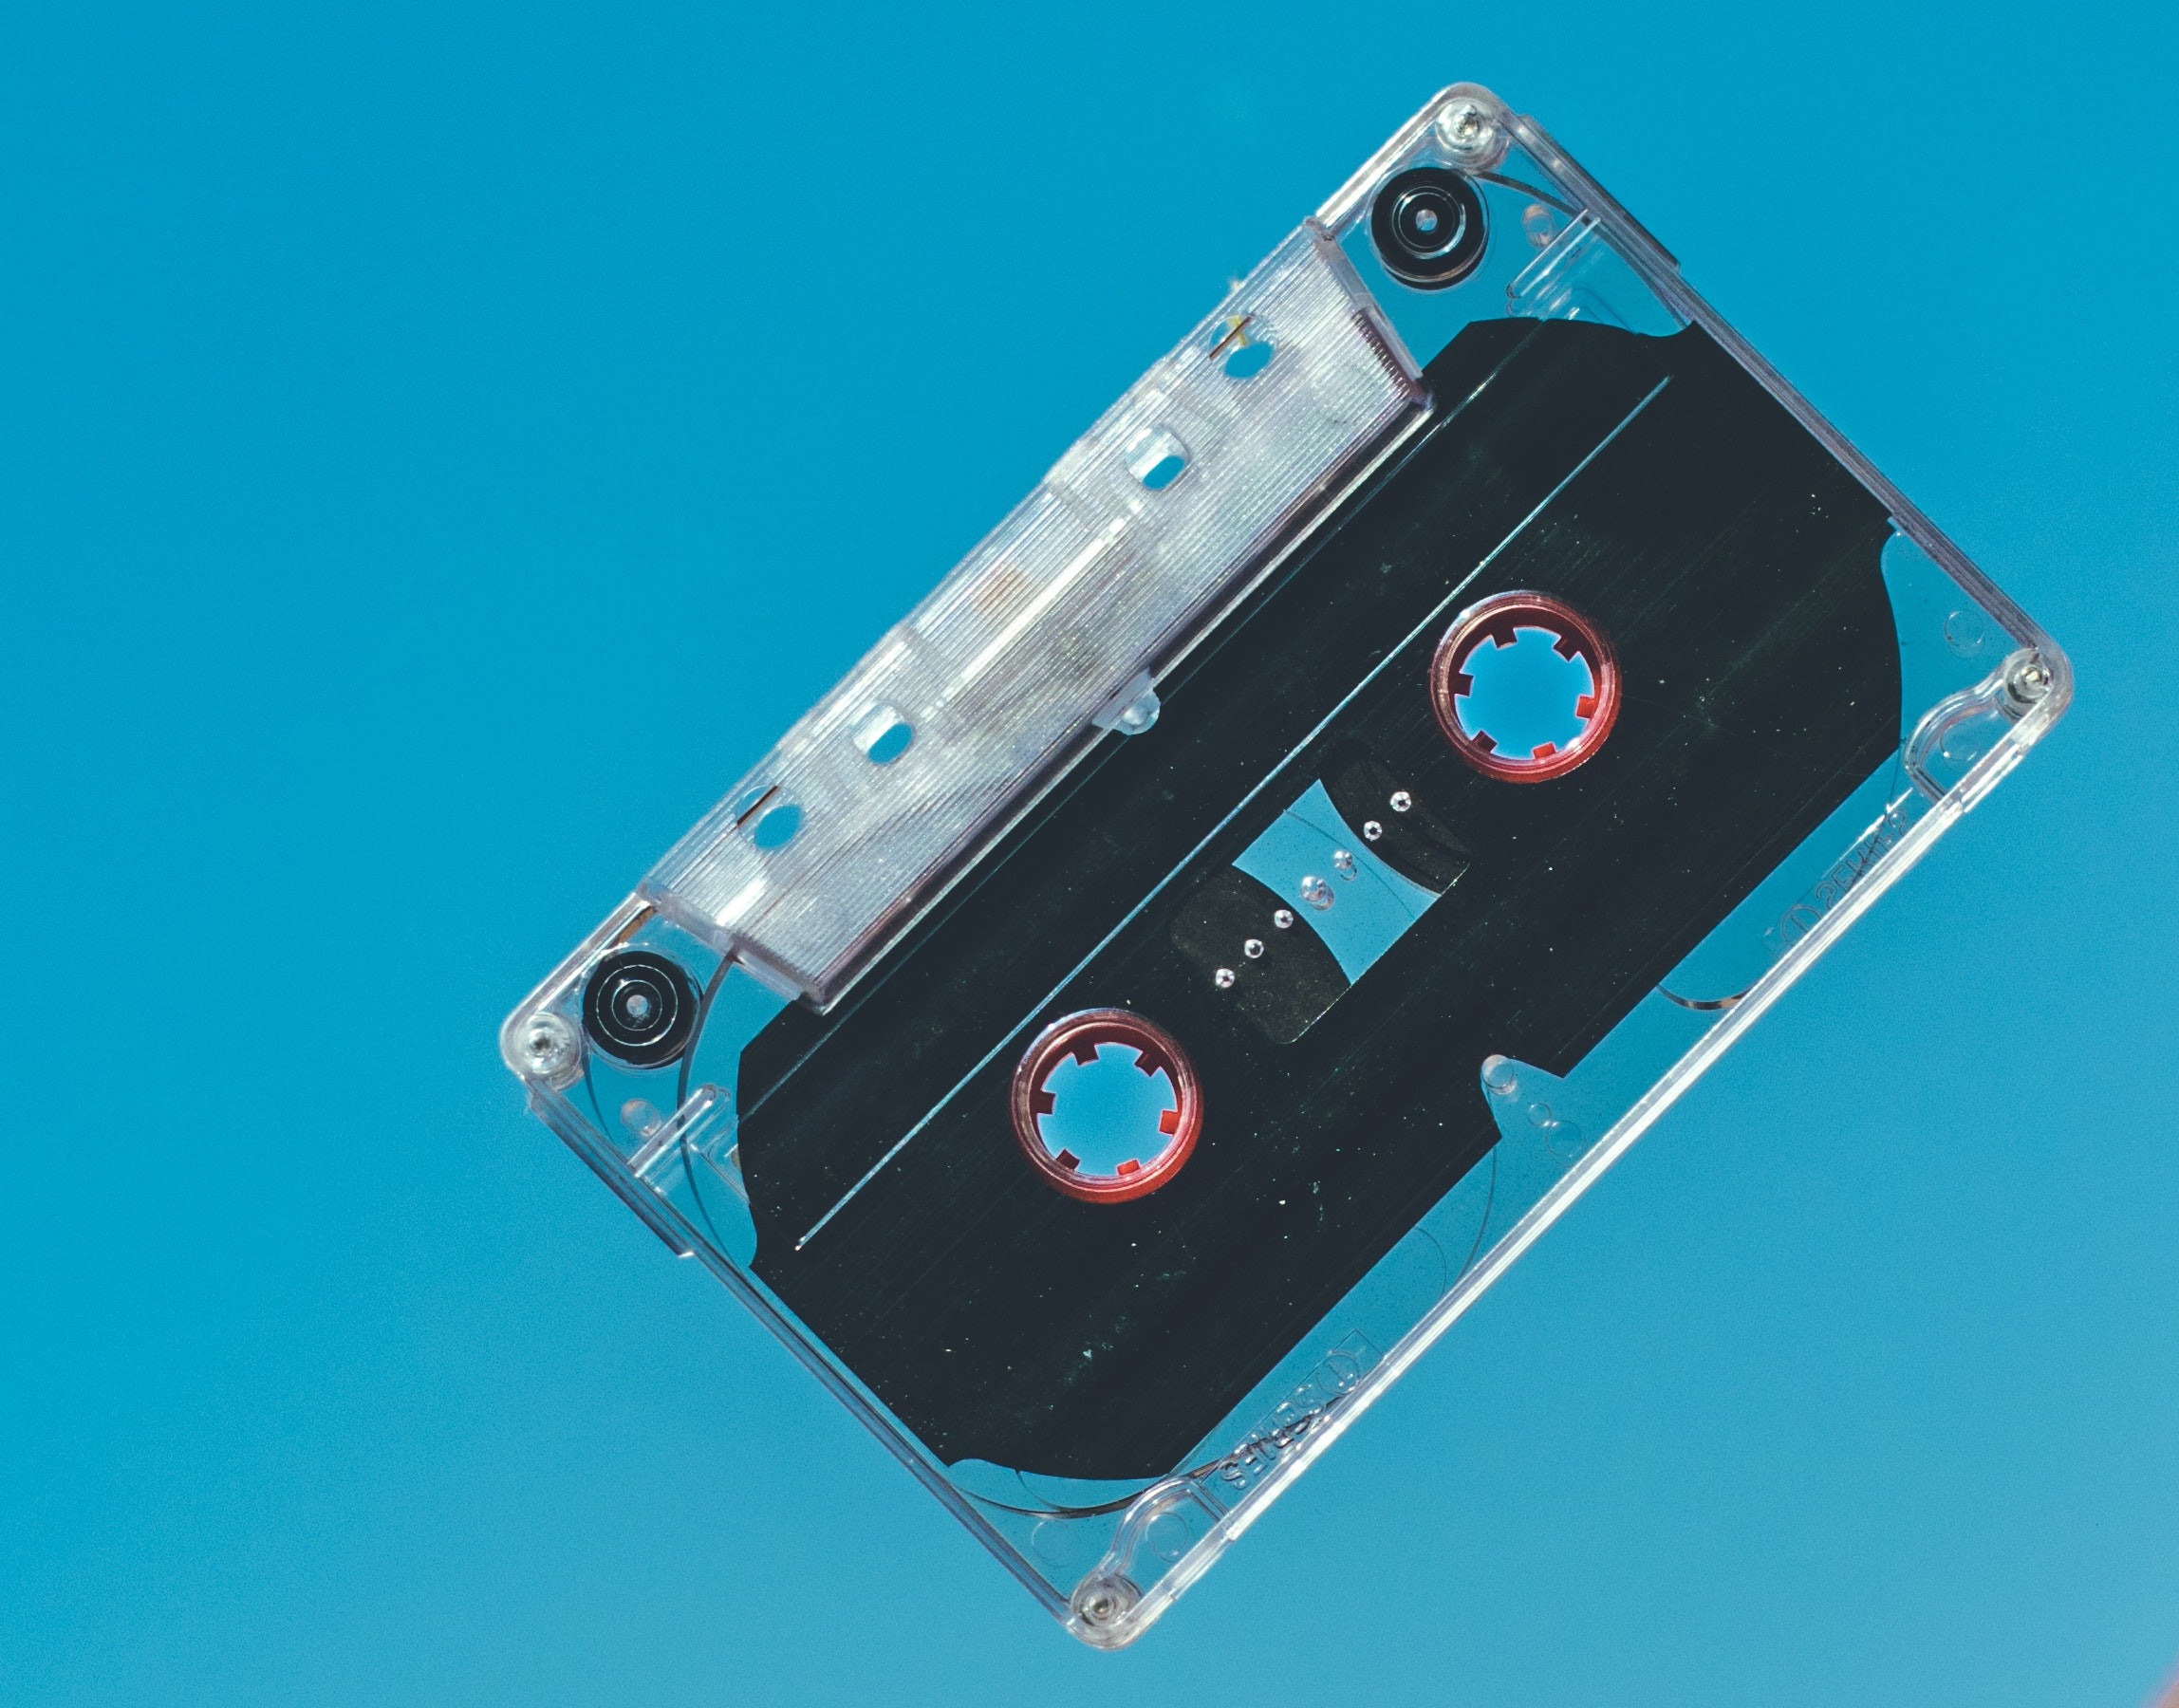 Cassette Tape - The Importance of On-Hold Music